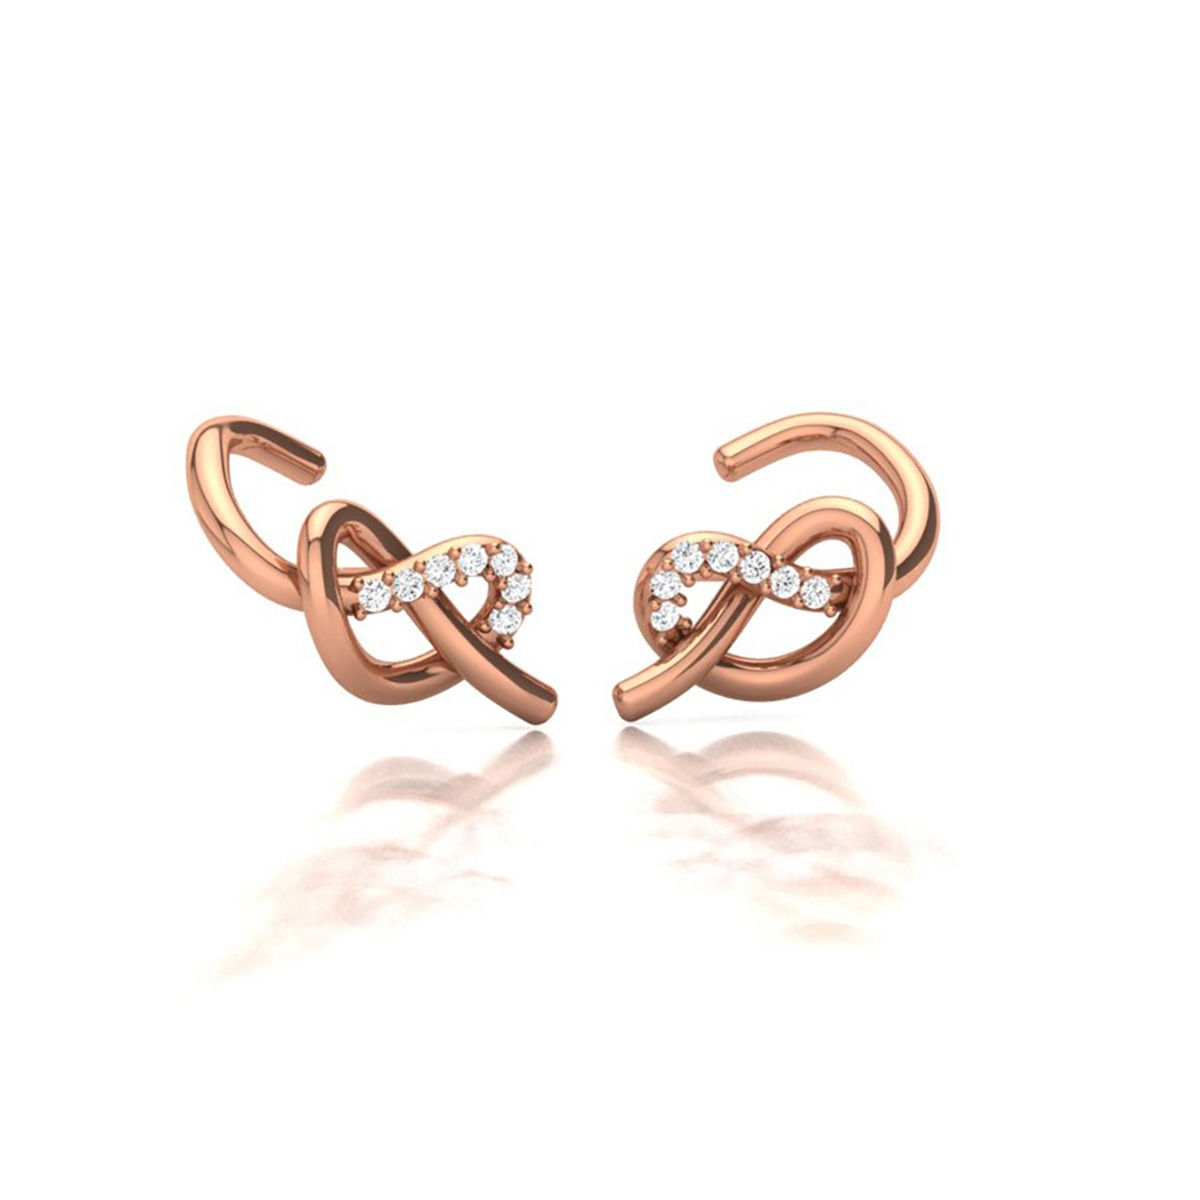 LOVE KNOT STUD EARRINGS 14k Yellow Gold  The Littl A8999 A8999 14k  Yellow Gold Bridal Jewellery Only cheap